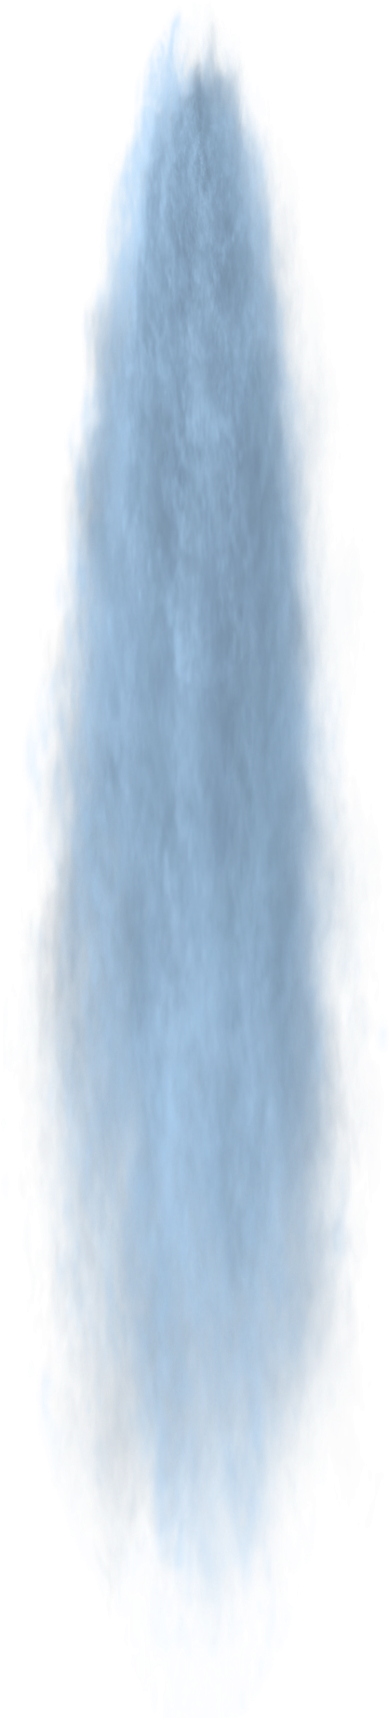 Majestic Waterfall Top View.png PNG